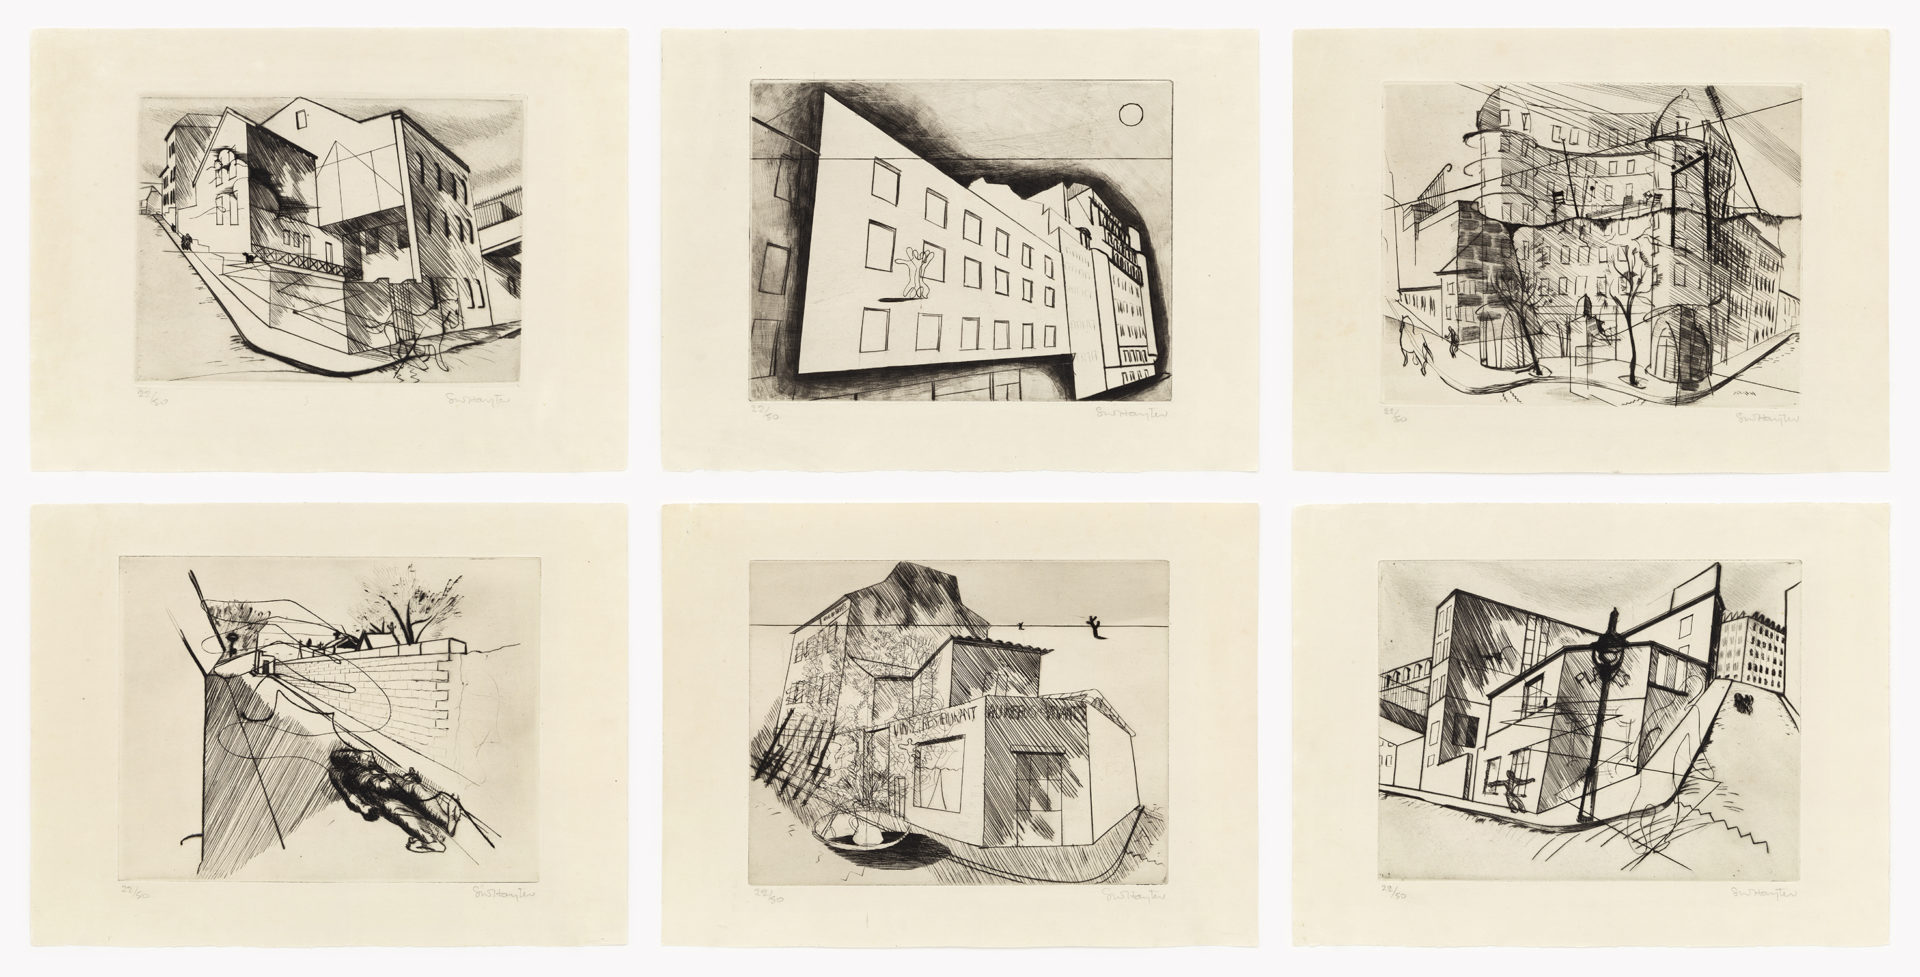 Paysages Urbains, 1930, Drypoint and engraving 11 x 15 inches (27.9 x 38.1 cm) each Edition of 50